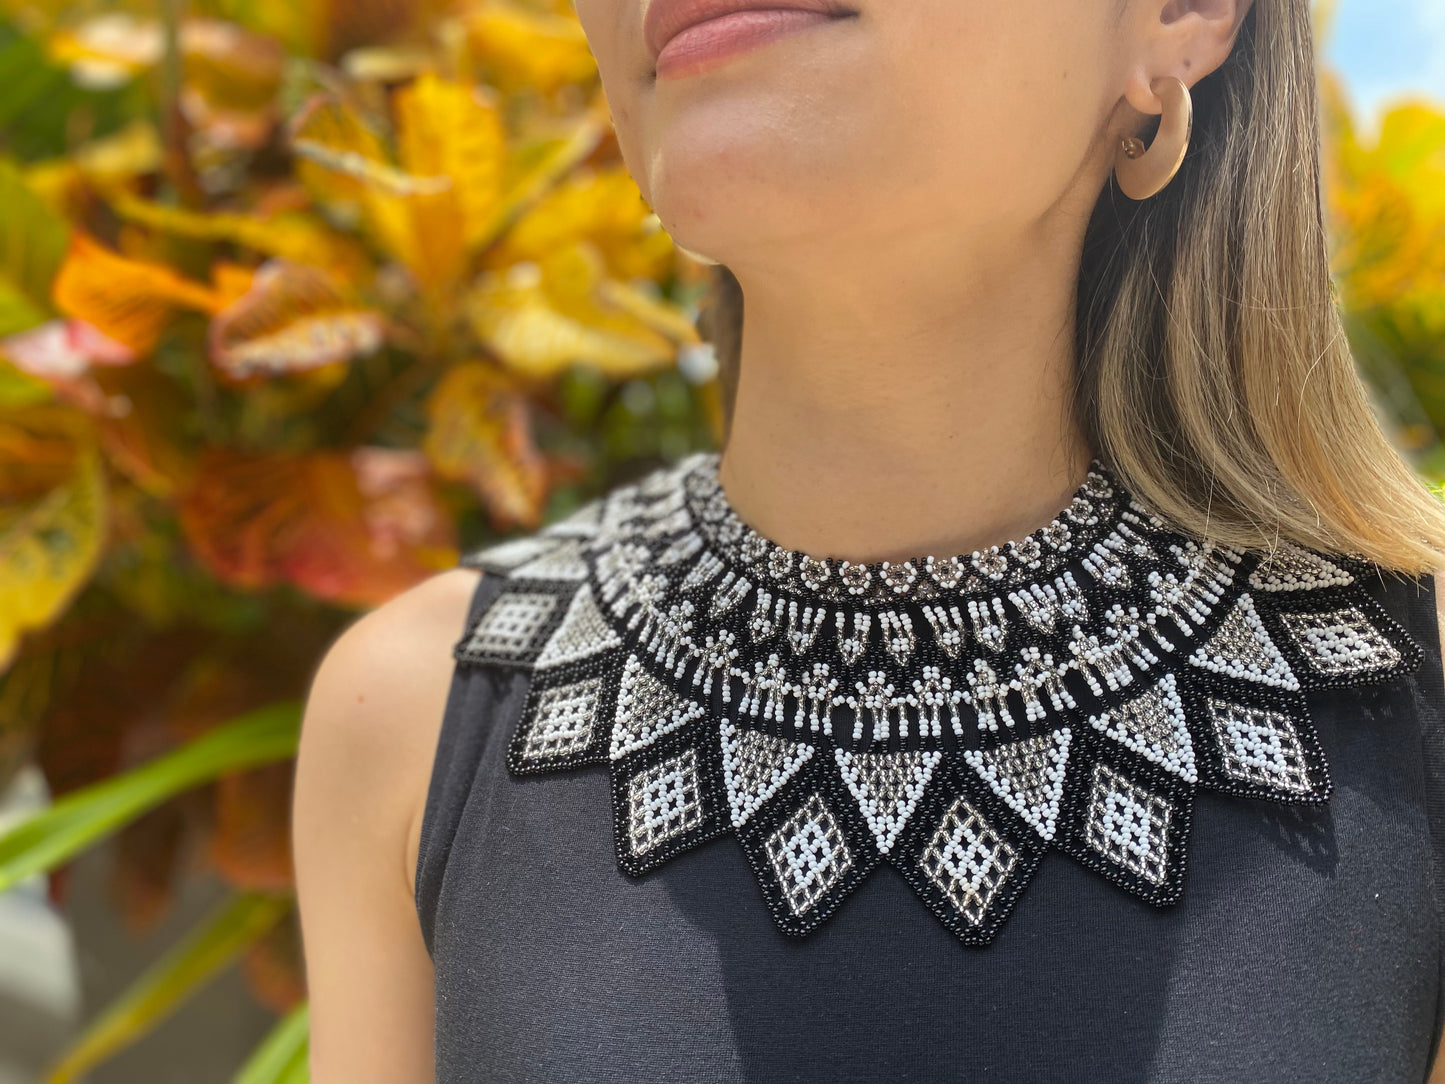 Enlace Beads Collar Necklace / Monte Blanco